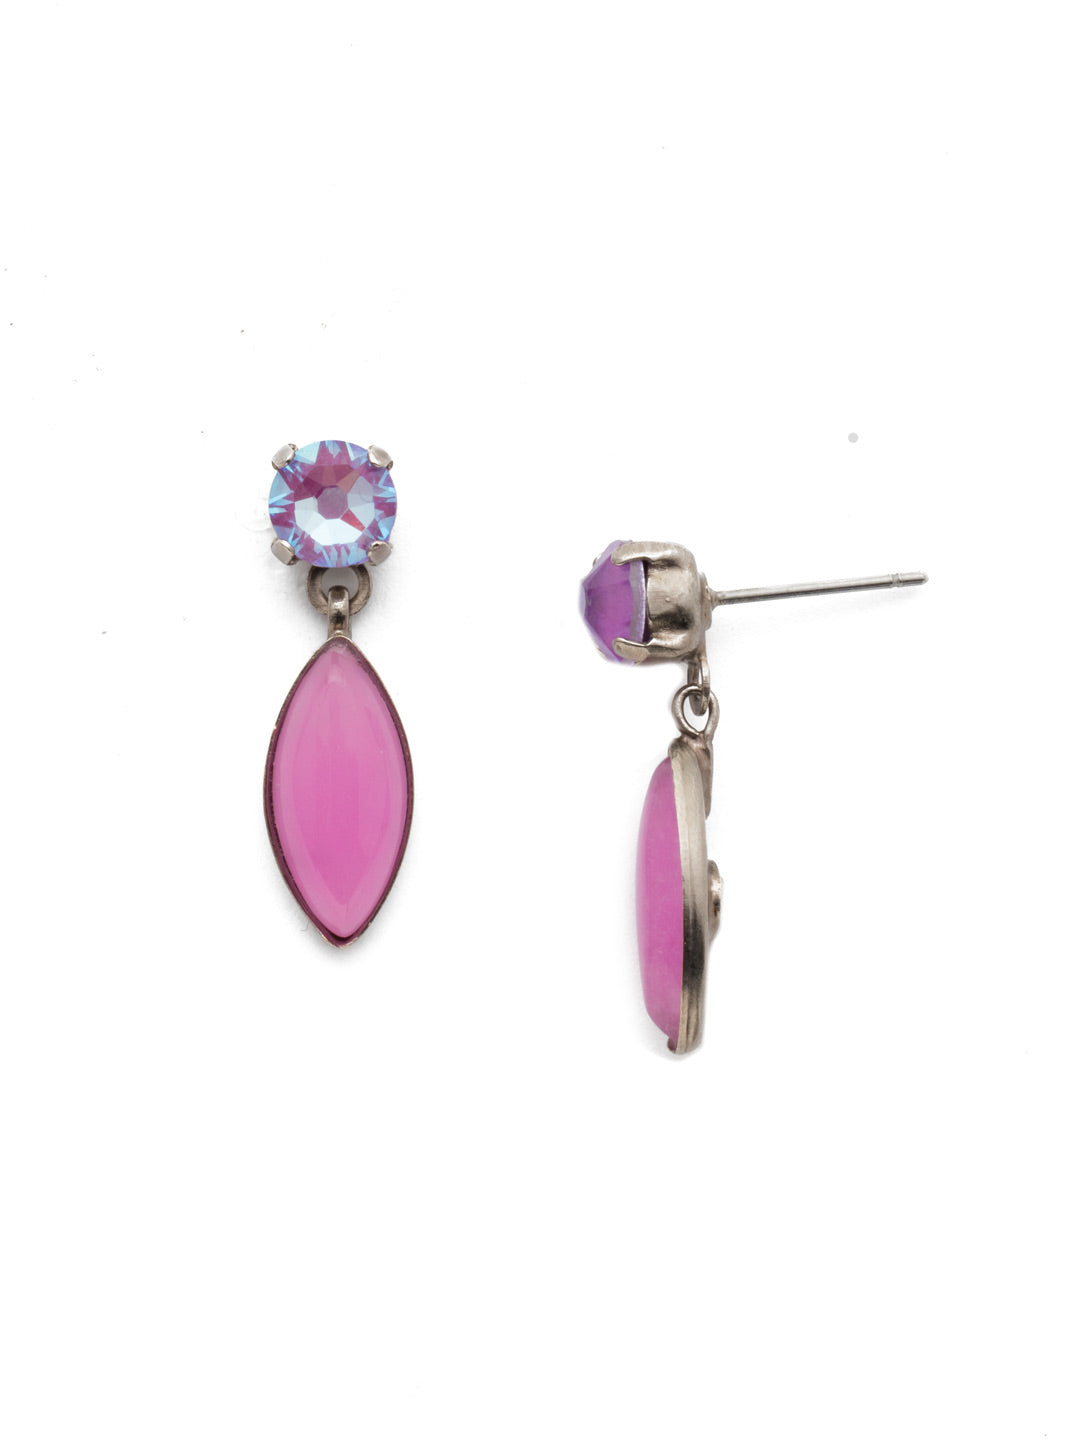 Jupiter Dangle Earrings - EEP65ASETP - Our Jupiter Dangle Earrings give an ode to Earth's beauty with their natural stonework look dripping from a classic faceted crystal beauty. From Sorrelli's Electric Pink collection in our Antique Silver-tone finish.